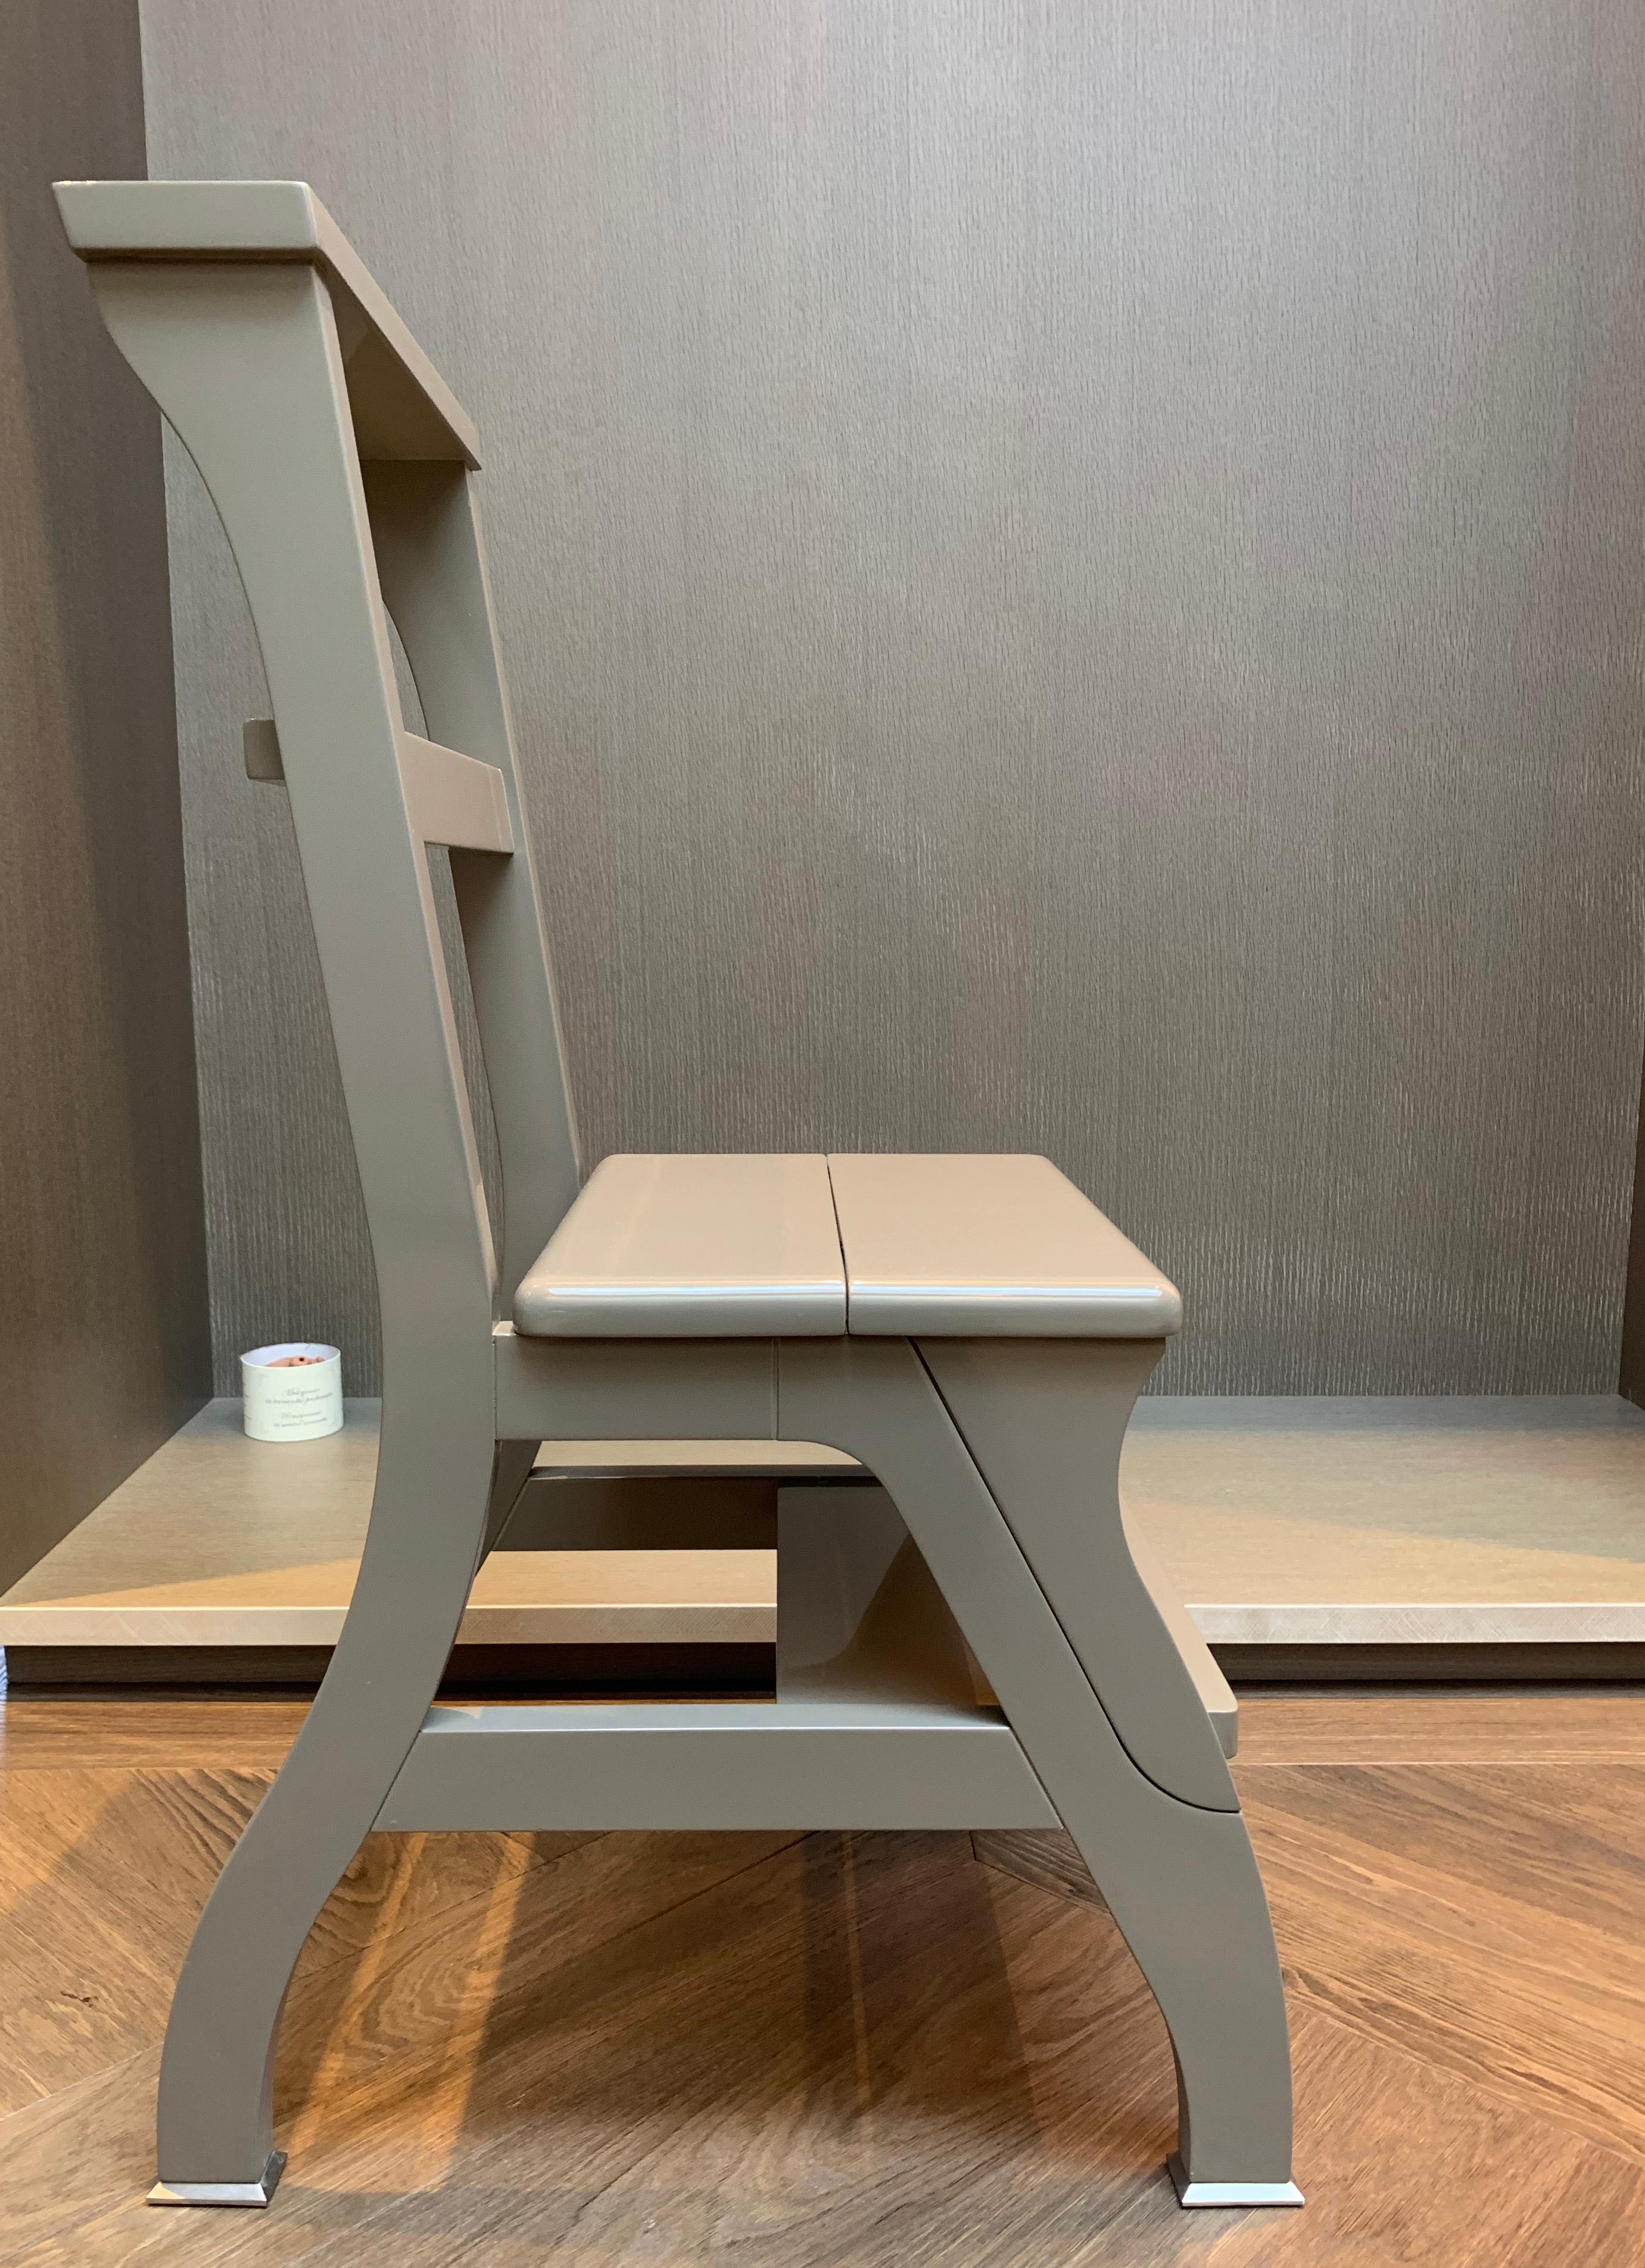 Nickel Contemporary, Grey Lacquered, Beechwood, Ladder Chair by Promemoria